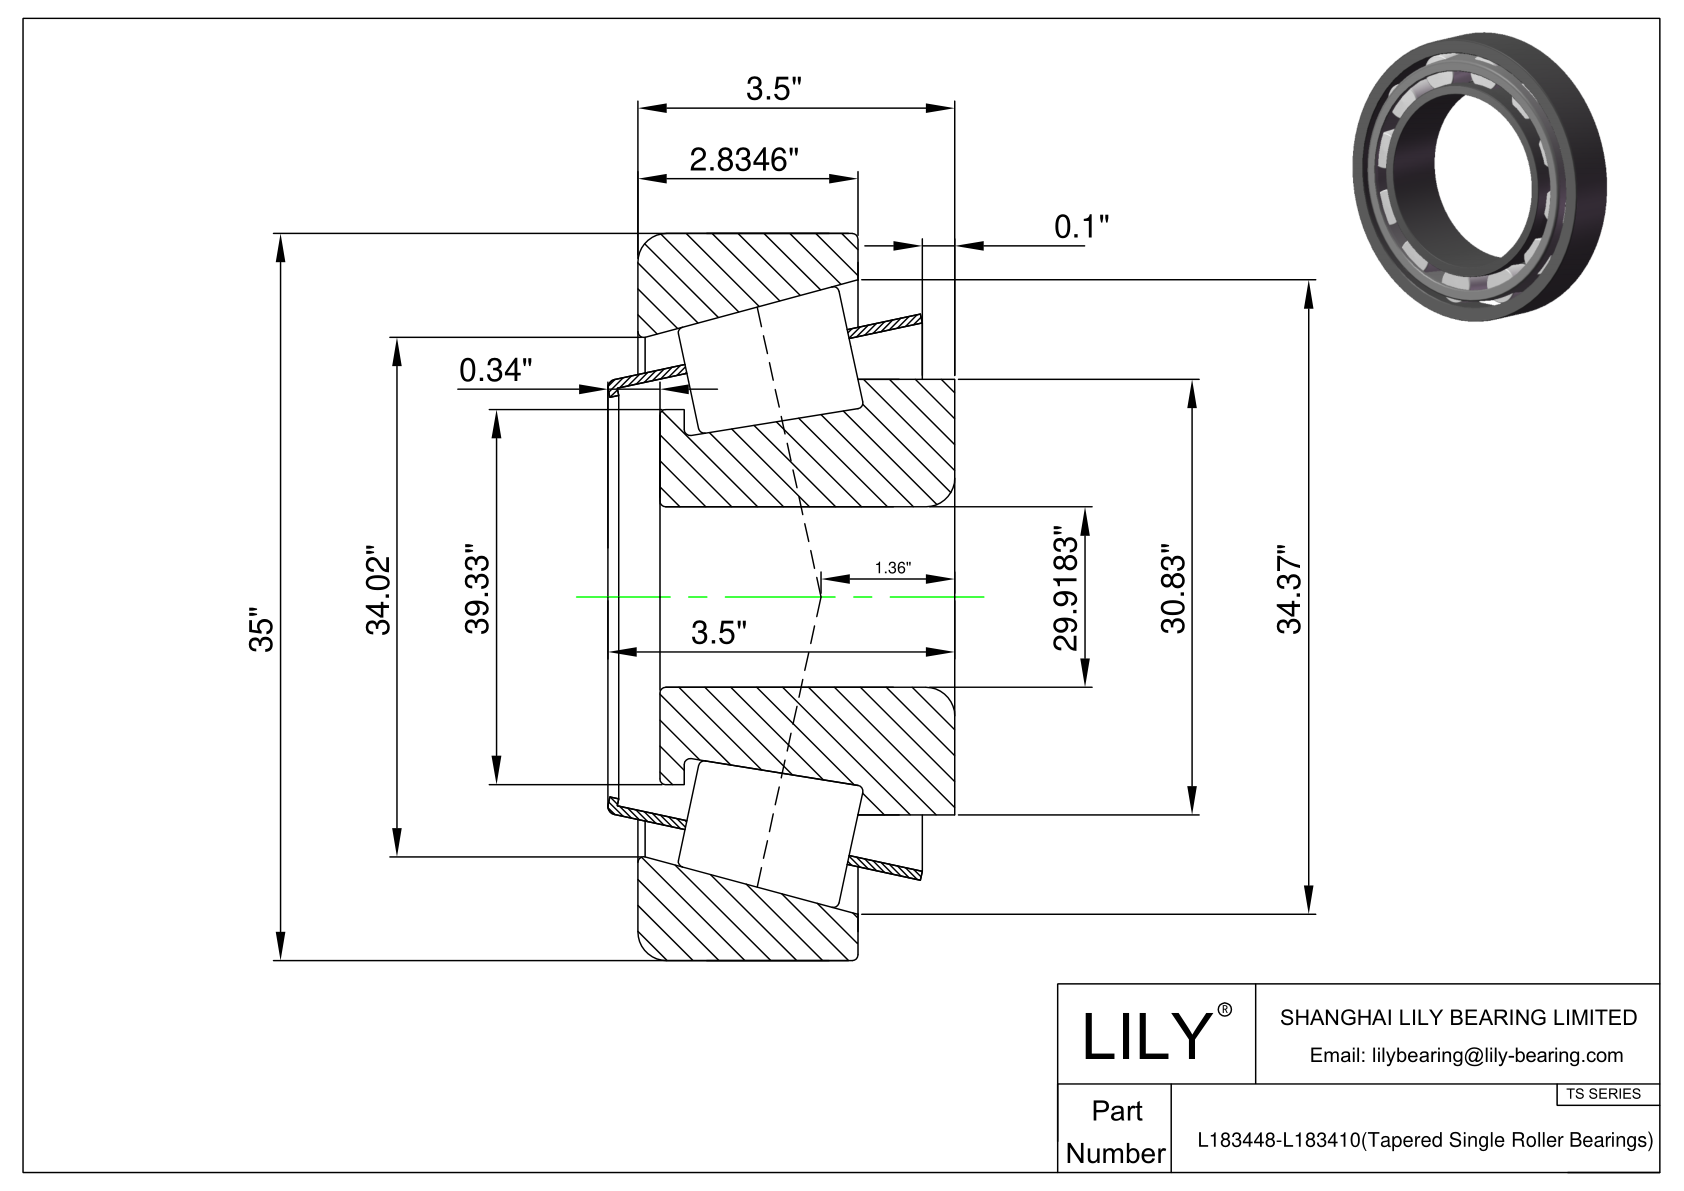 L183448-L183410 TS (Tapered Single Roller Bearings) (Imperial) cad drawing